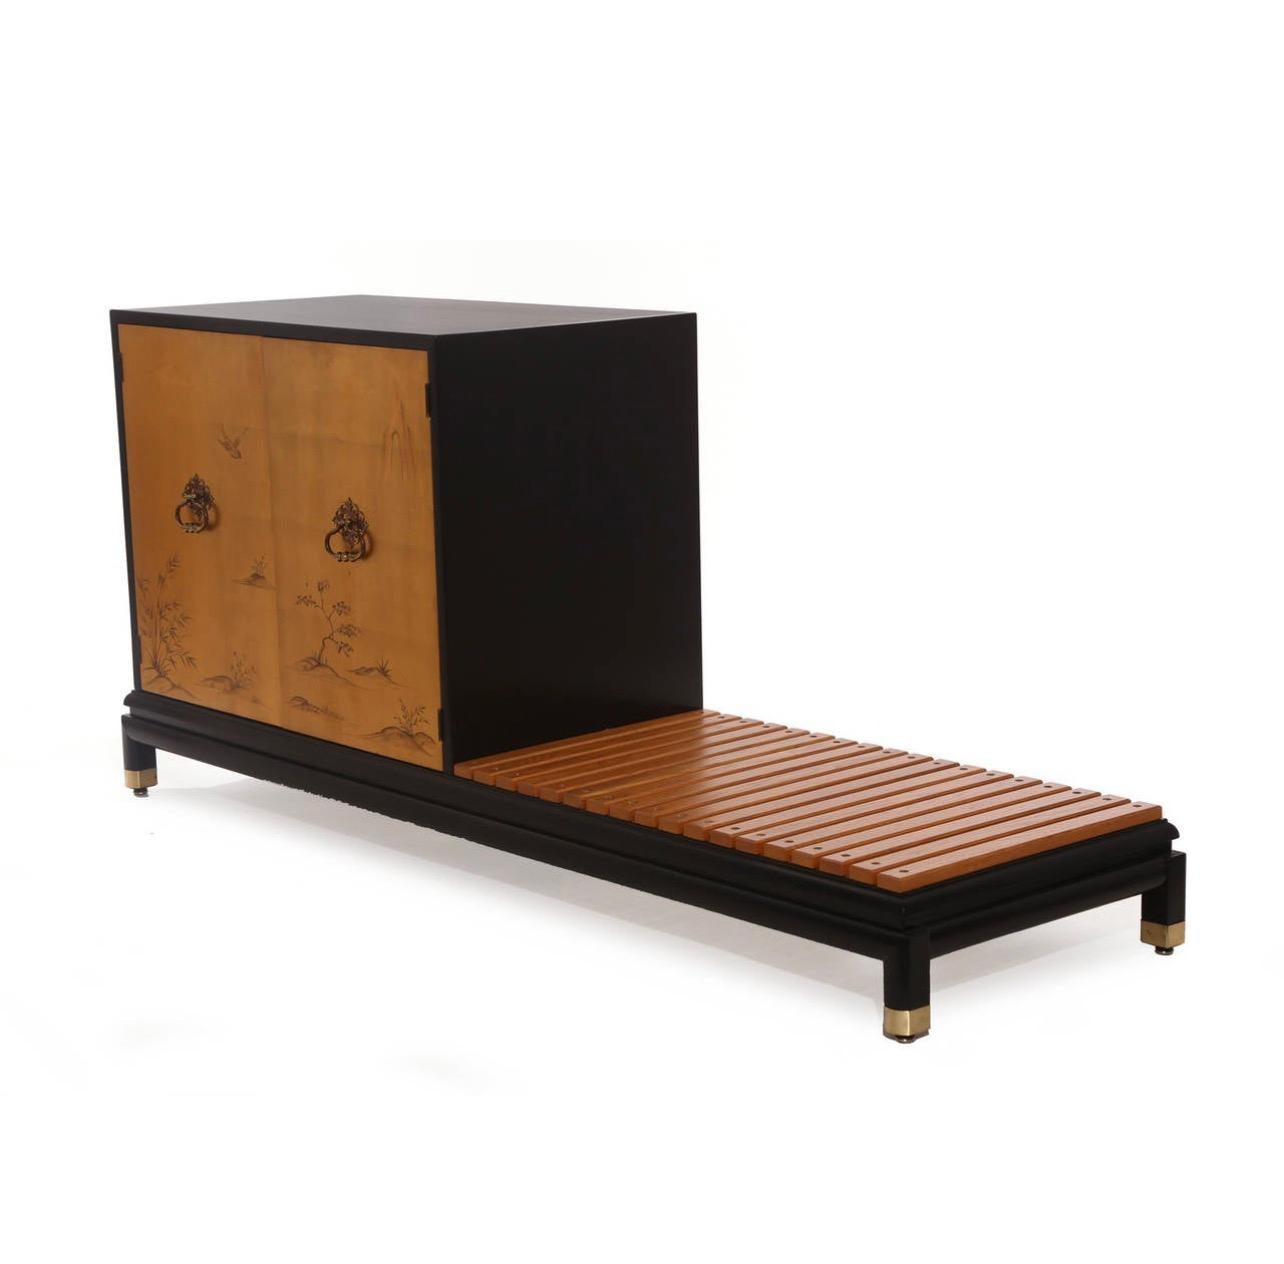 Renzo Rutili for Johnson Furniture Company chest with bench, circa late 1950s. It has gold leafed doors and ebonized case and bench. The interior of the chest has an adjustable shelf, and the case is finished on the front and back. It could be used